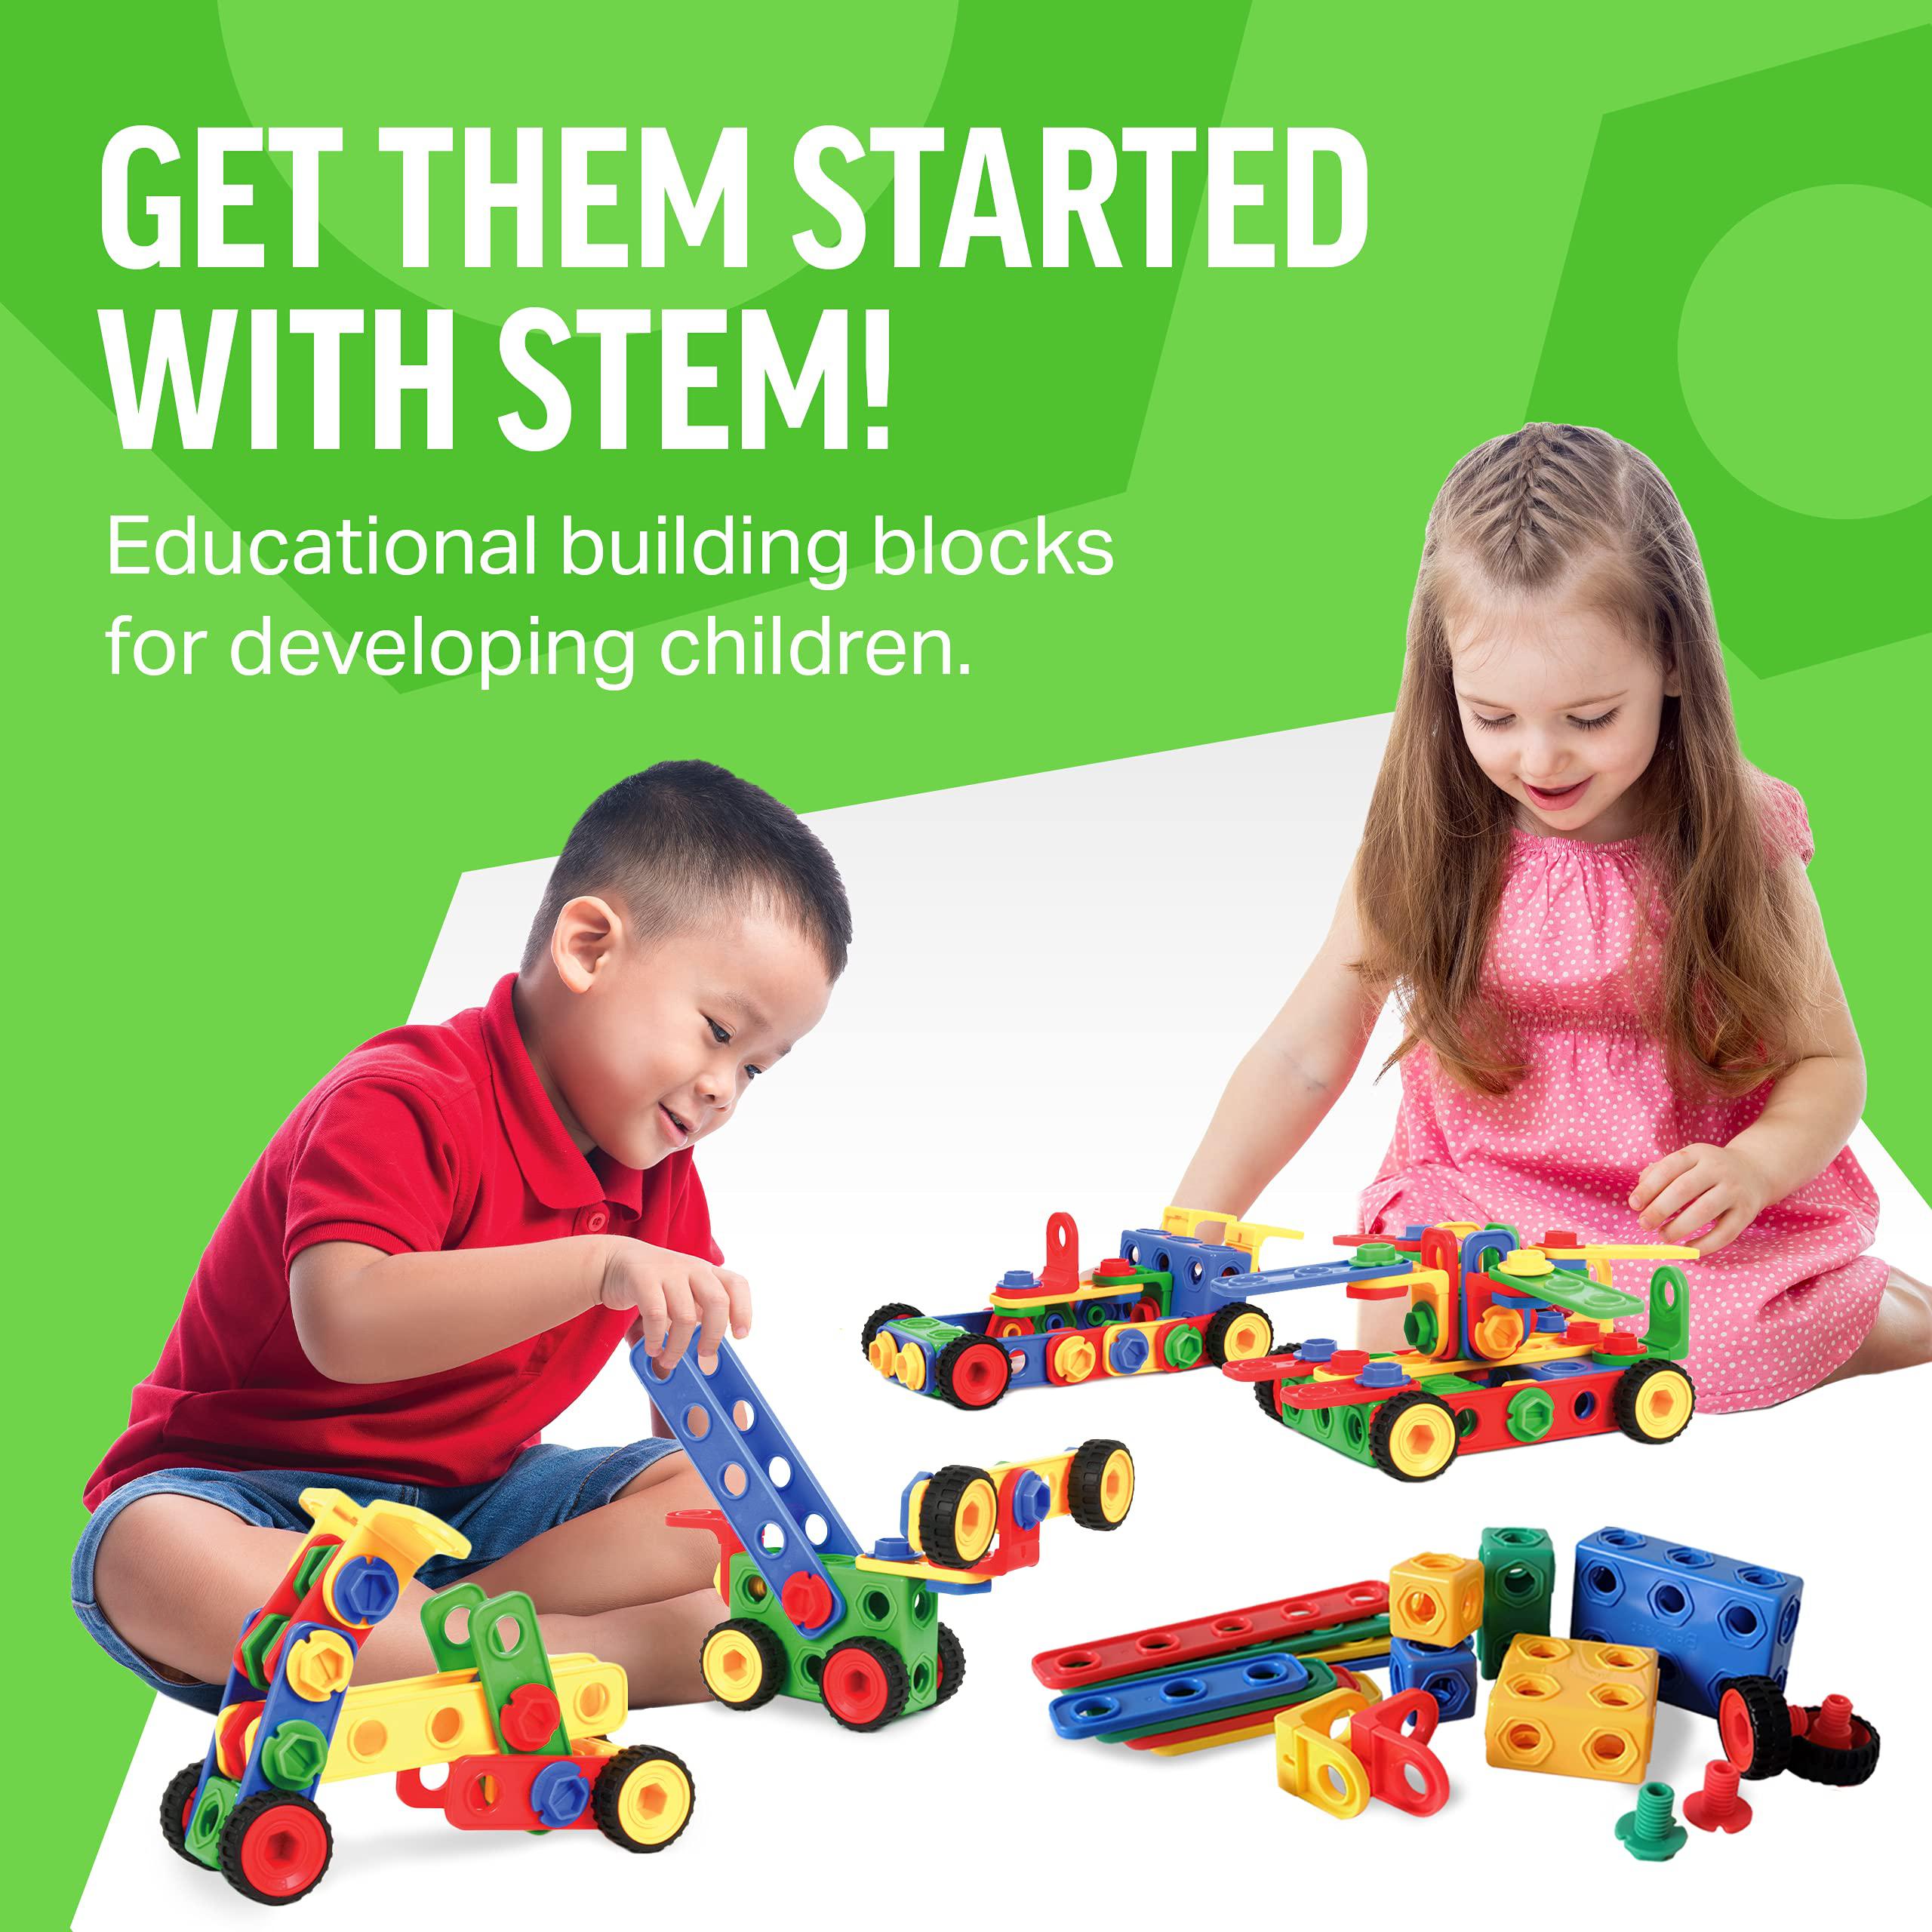 brickyard building blocks stem toys - educational building toys for kids ages 4-8 with 163 pieces, tools, design guide and to